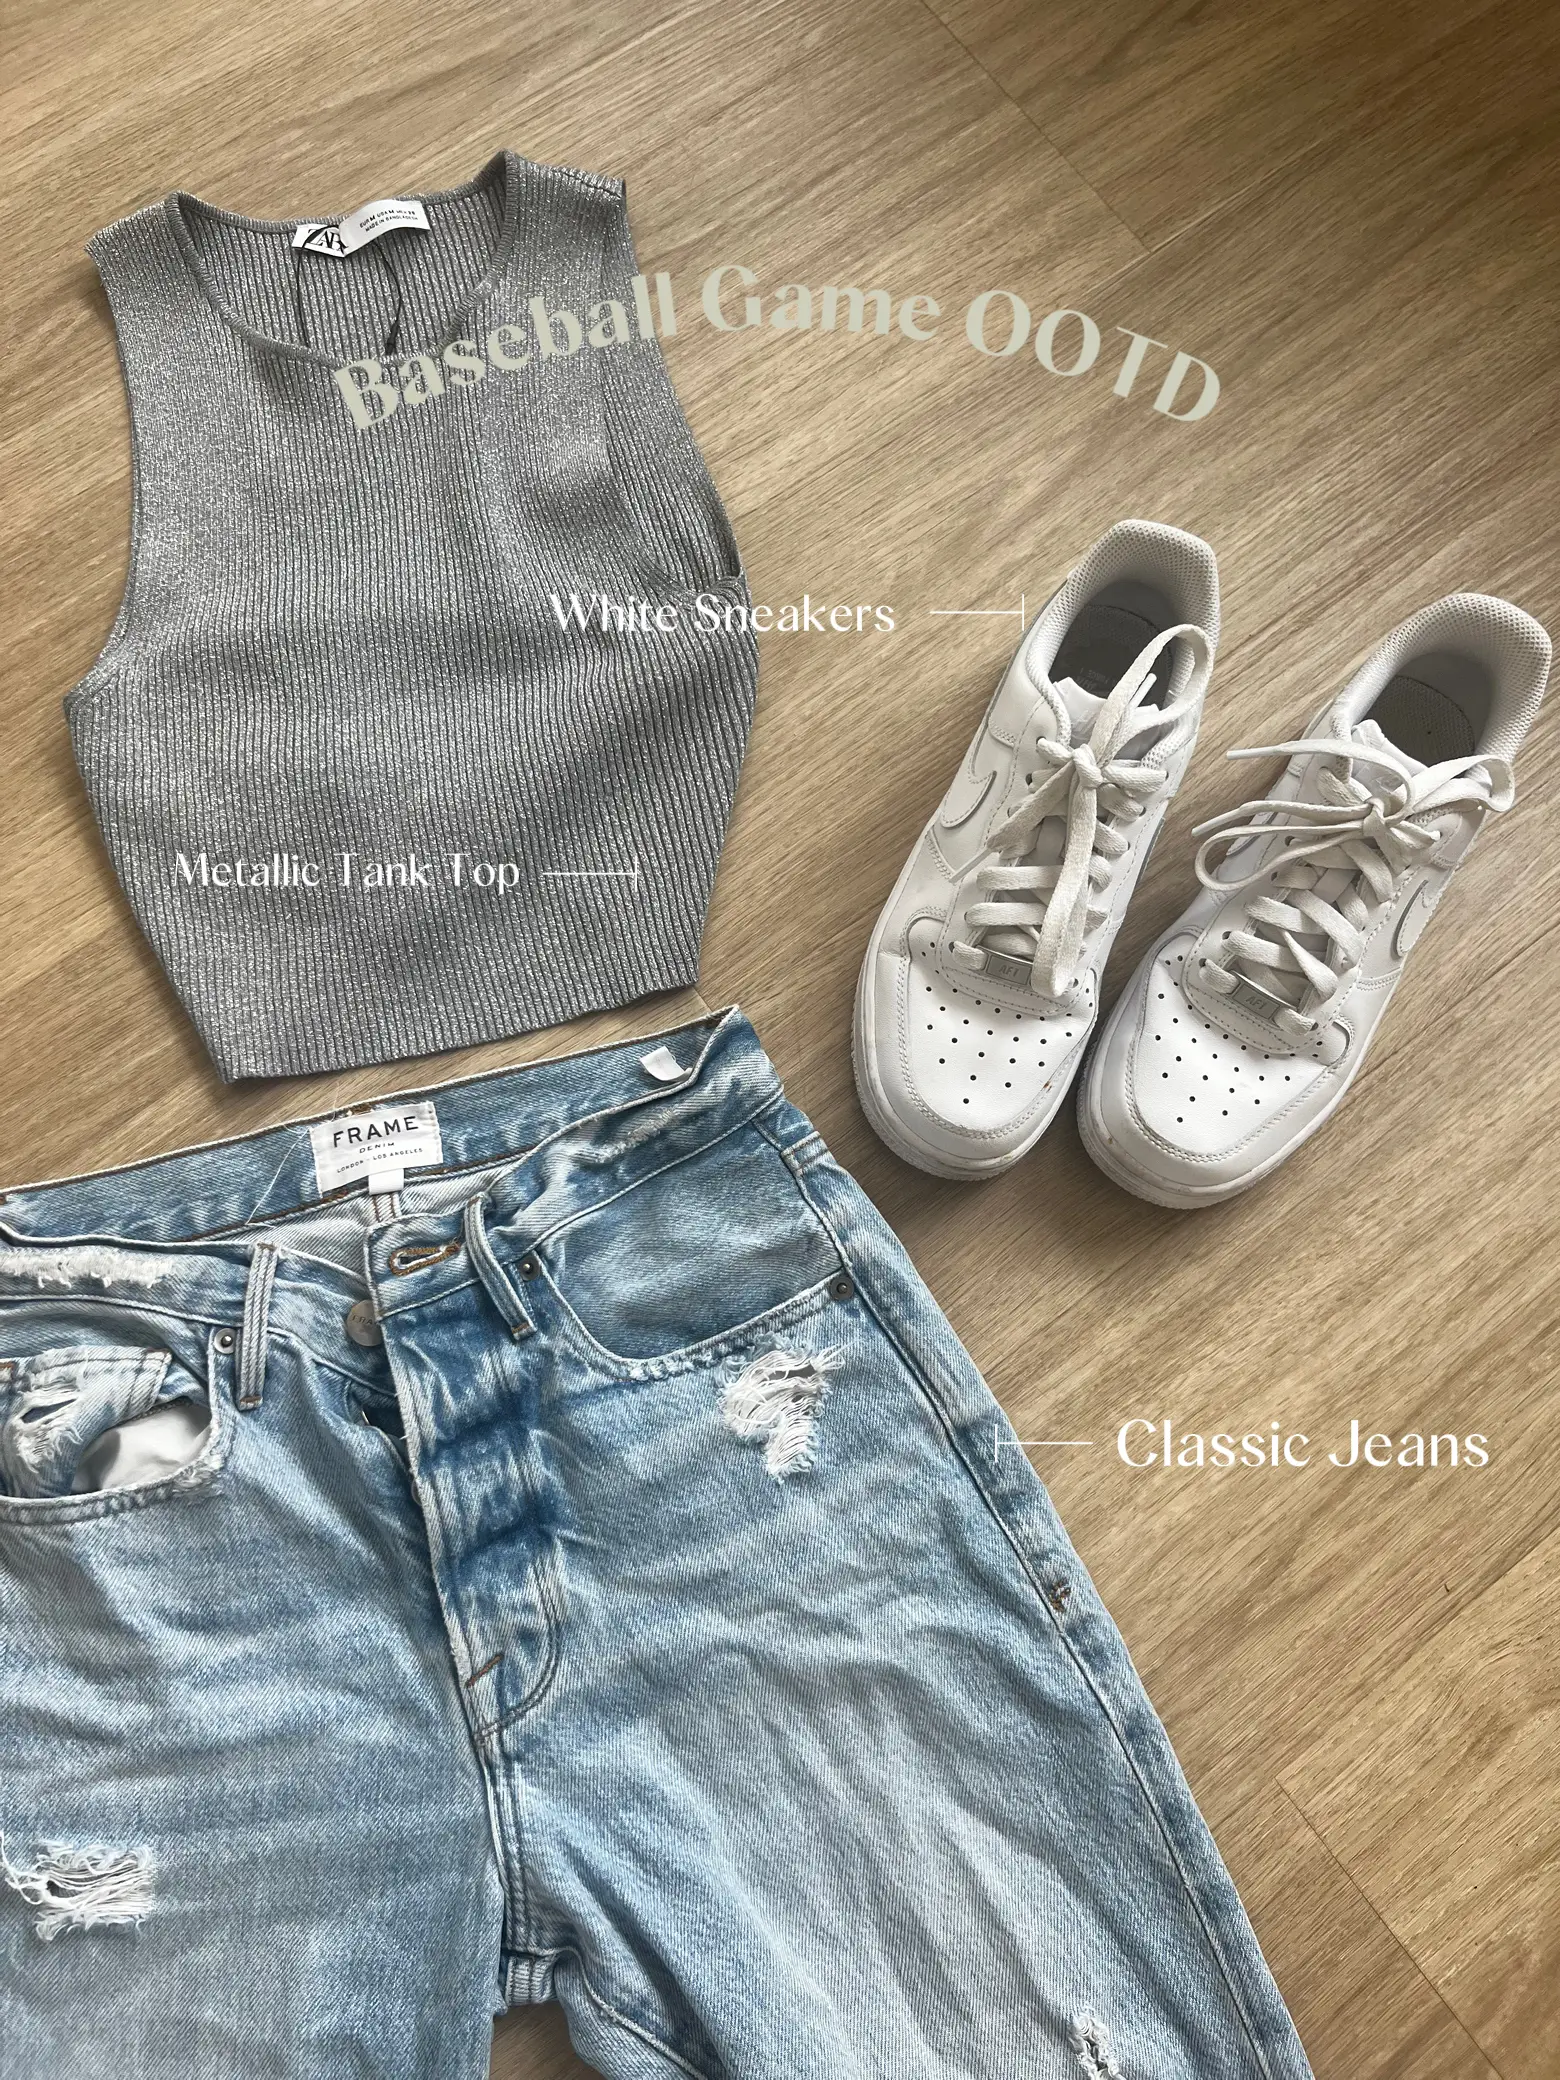 Mets Baseball Jersey! Boyfriend Jeans! Gold Chain!  Cute outfits with  shorts, Baseball jersey outfit women, Jeans outfit women